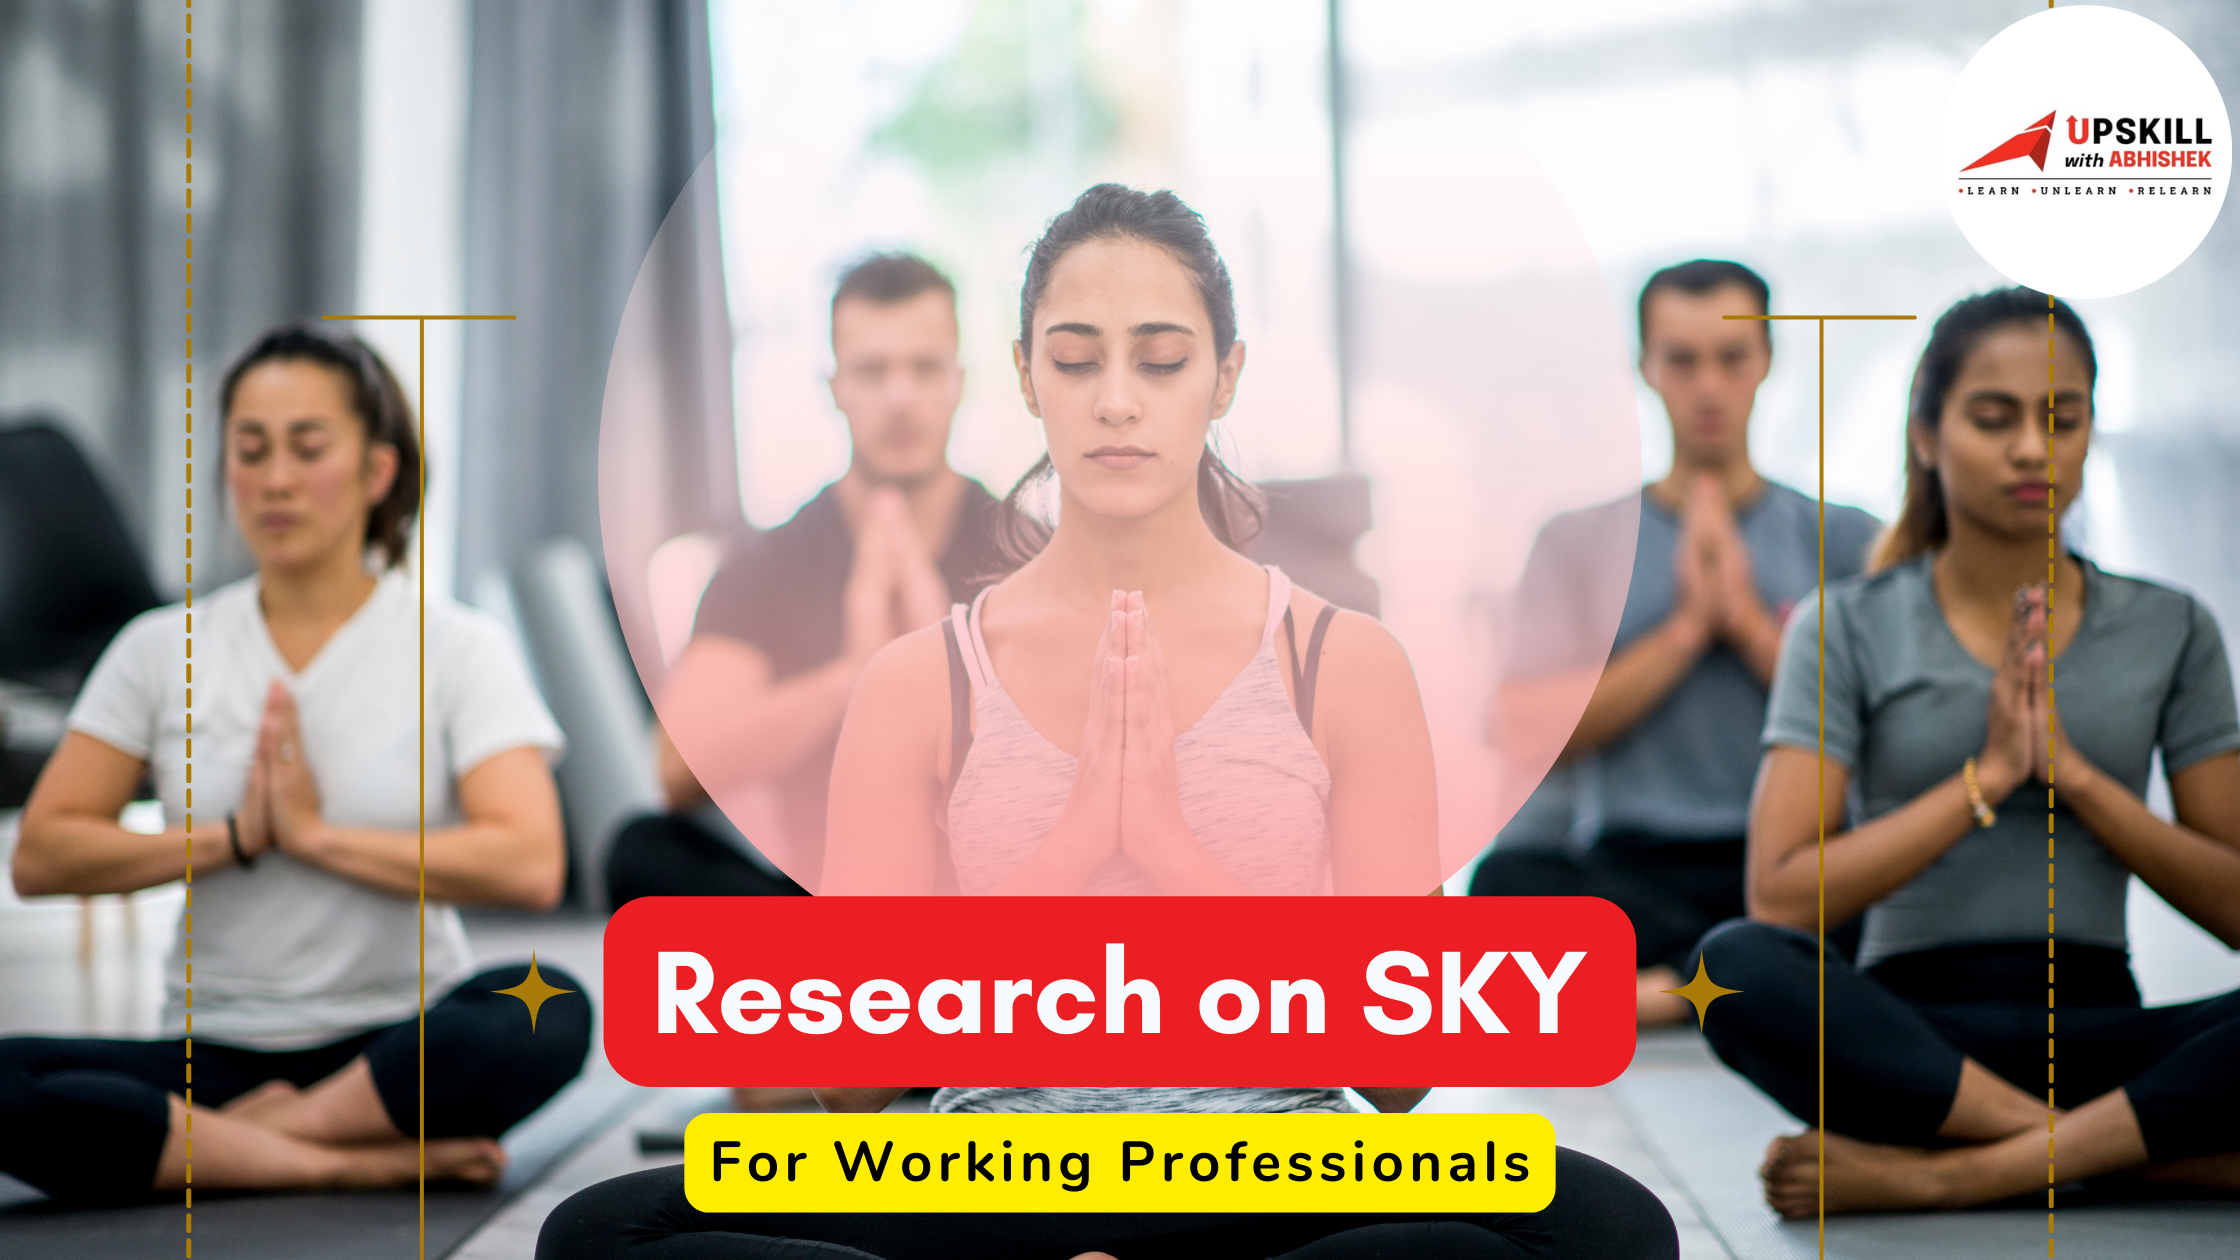 Well-being & Job Performance of a Working Professional are key aspects.